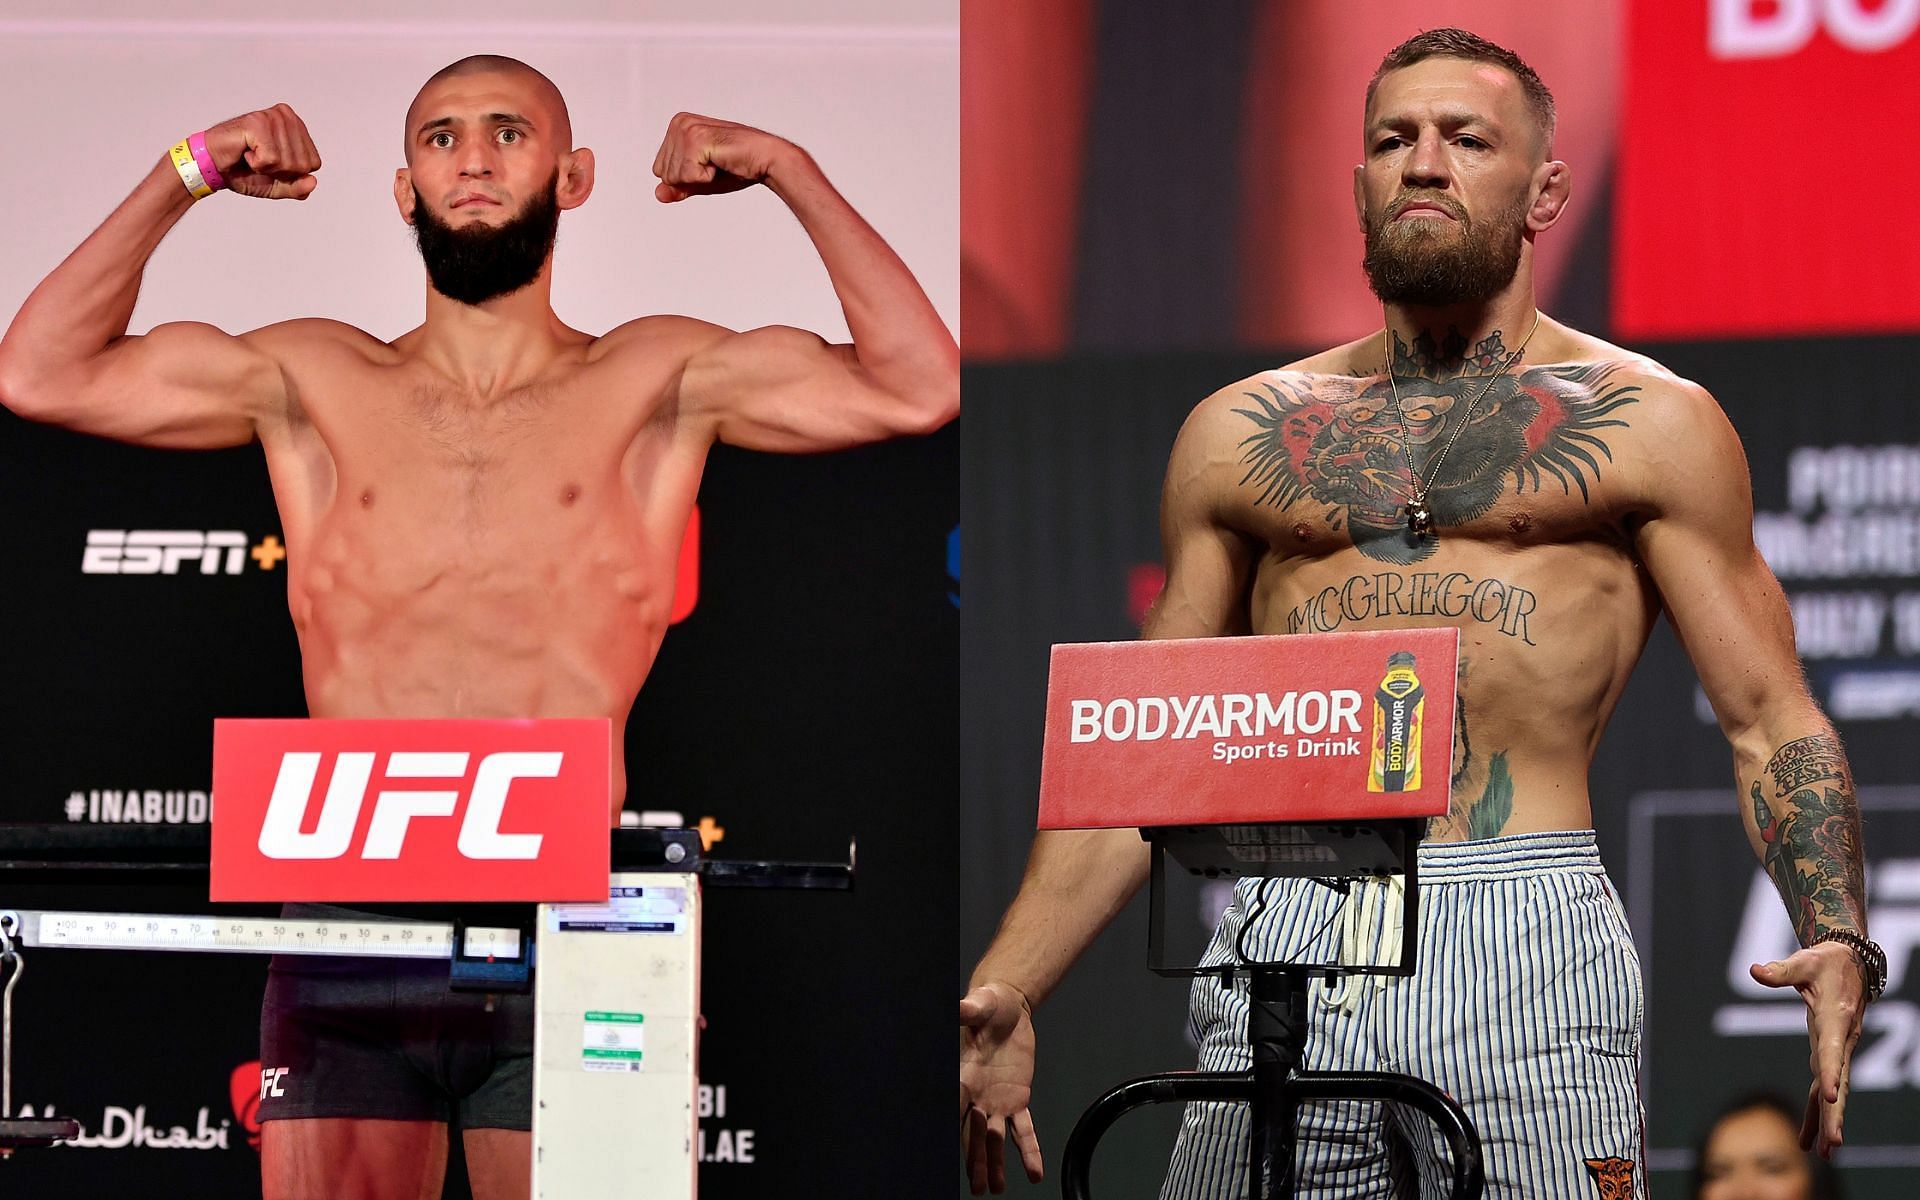 UFC welterweight superstar Khamzat Chimaev (left) and former lightweight and featherweight champion Conor McGregor (right)